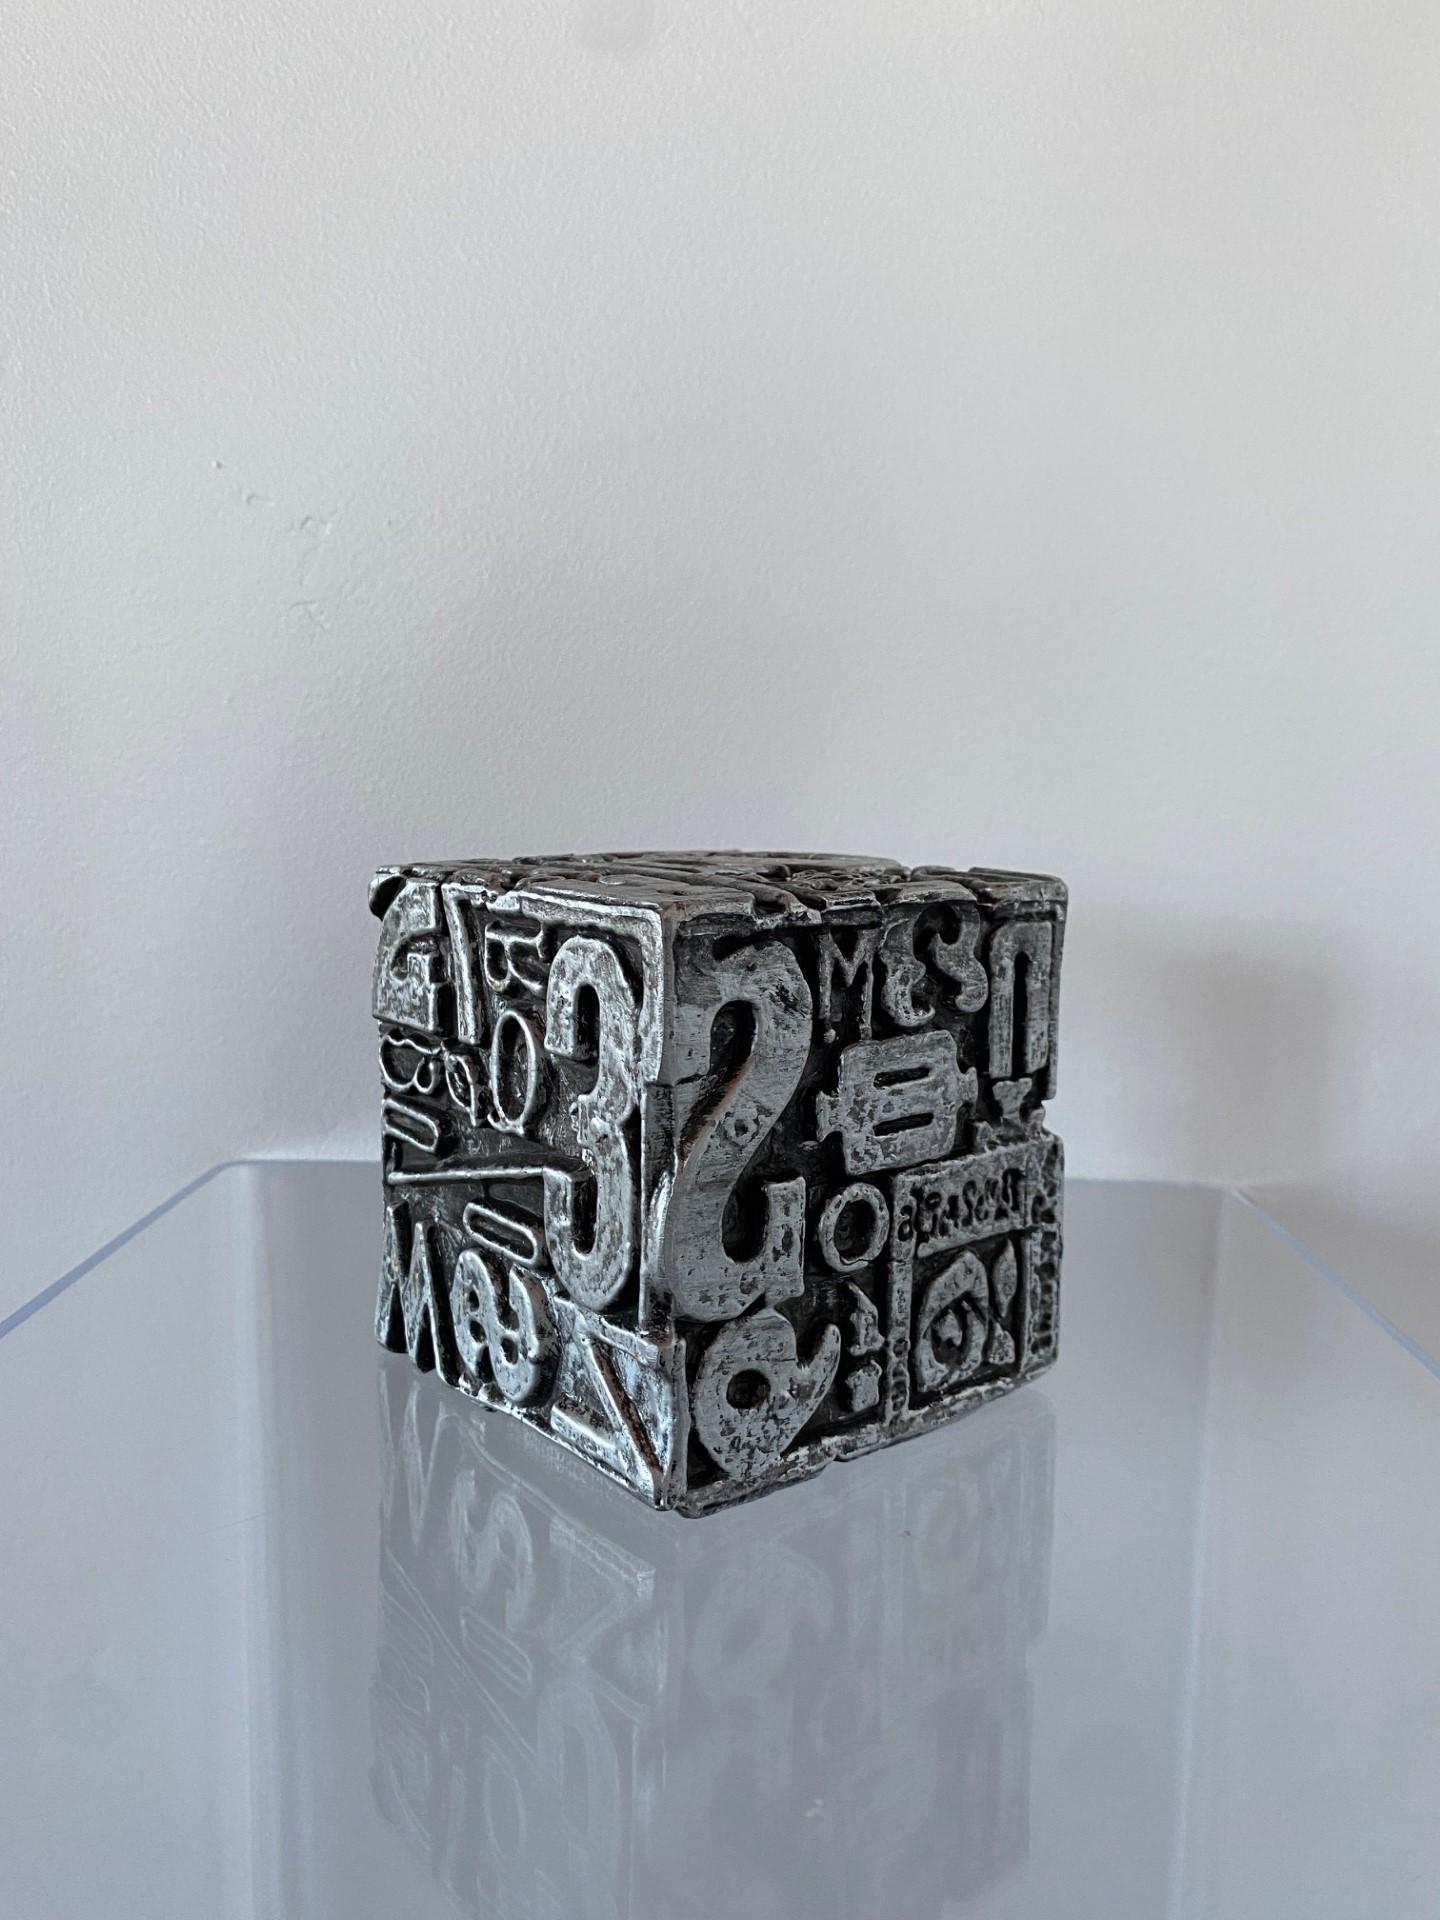 Signed Sheldon Rose (American 20th Century) Typesetter cube sculpture, can also be used as bookend. In polished polychrome silver metal. Sheldon Rose (American, 20th century), attended the Cooper Union in NYC in the 1960s. He is best known for his